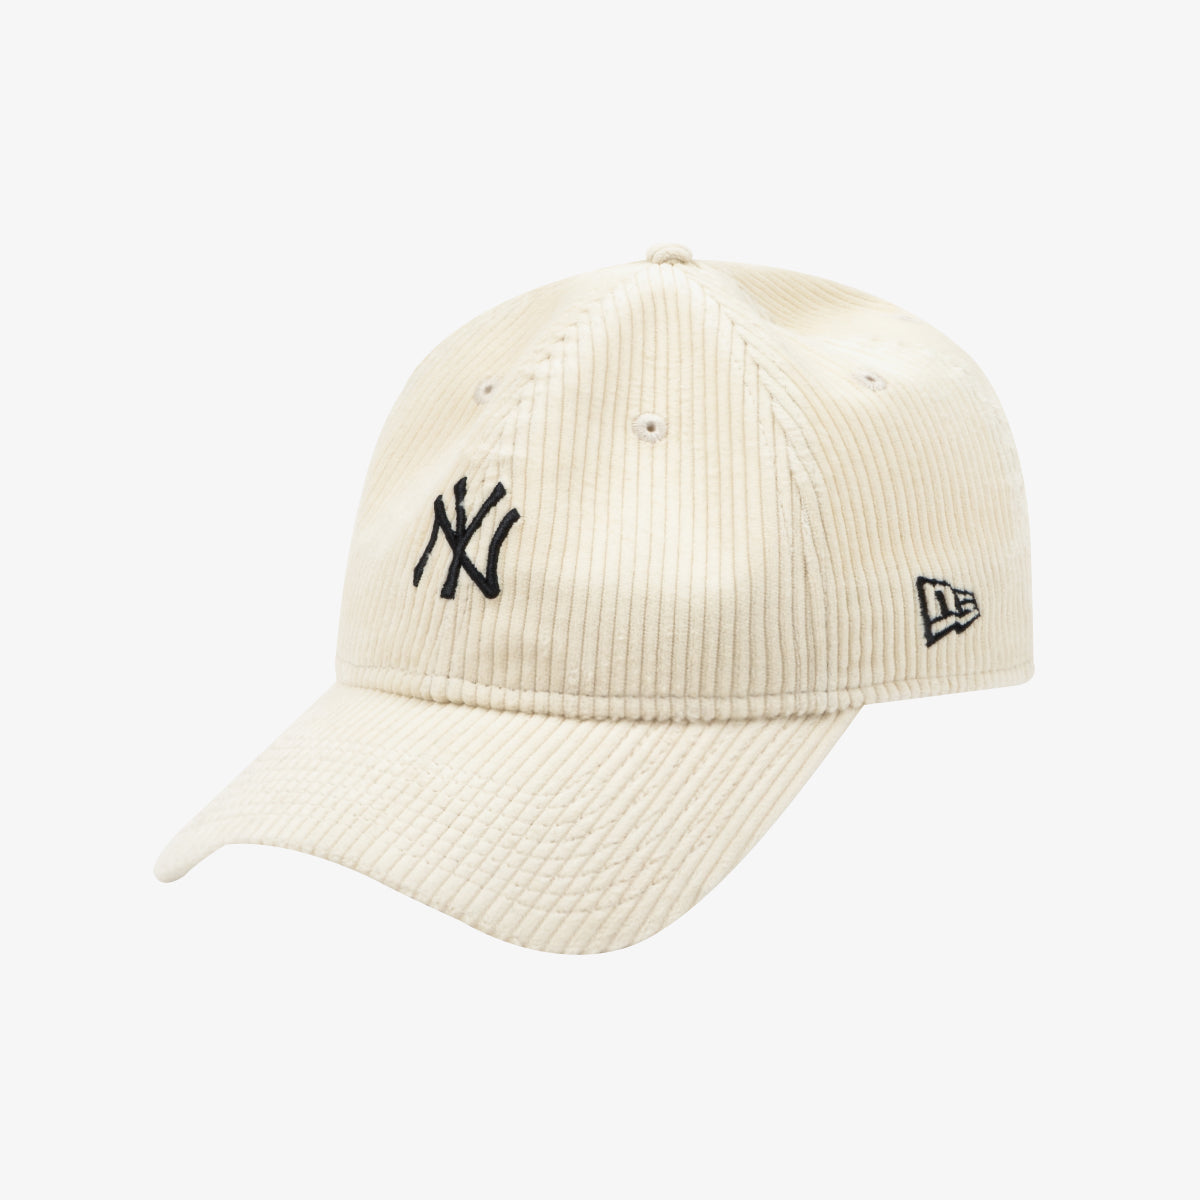 NEW YORK YANKEES CORDUROY OPEN WHITE 9FORTY UNST CAP